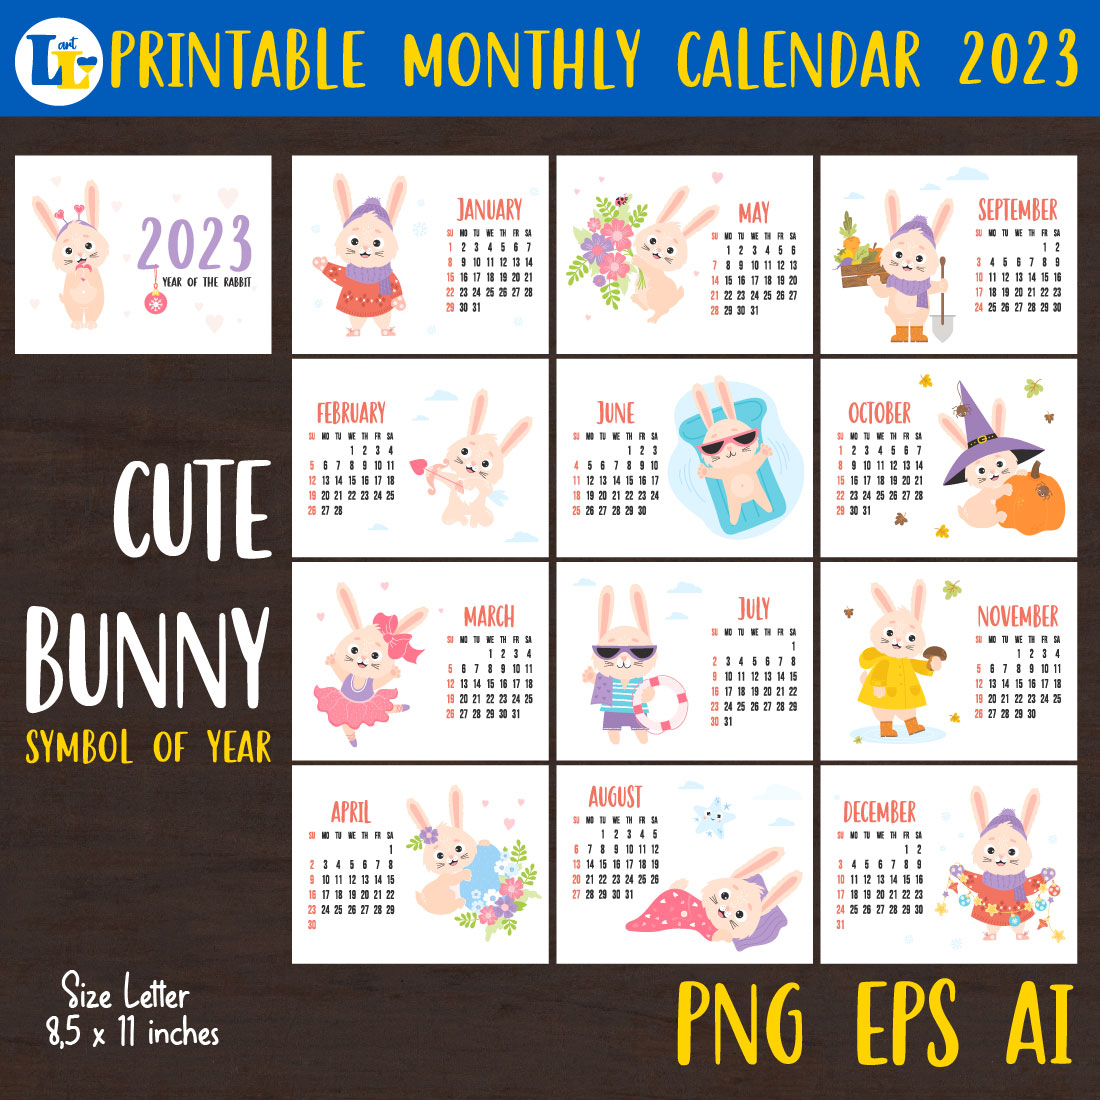 Printable Monthly Calendar Template cover image.